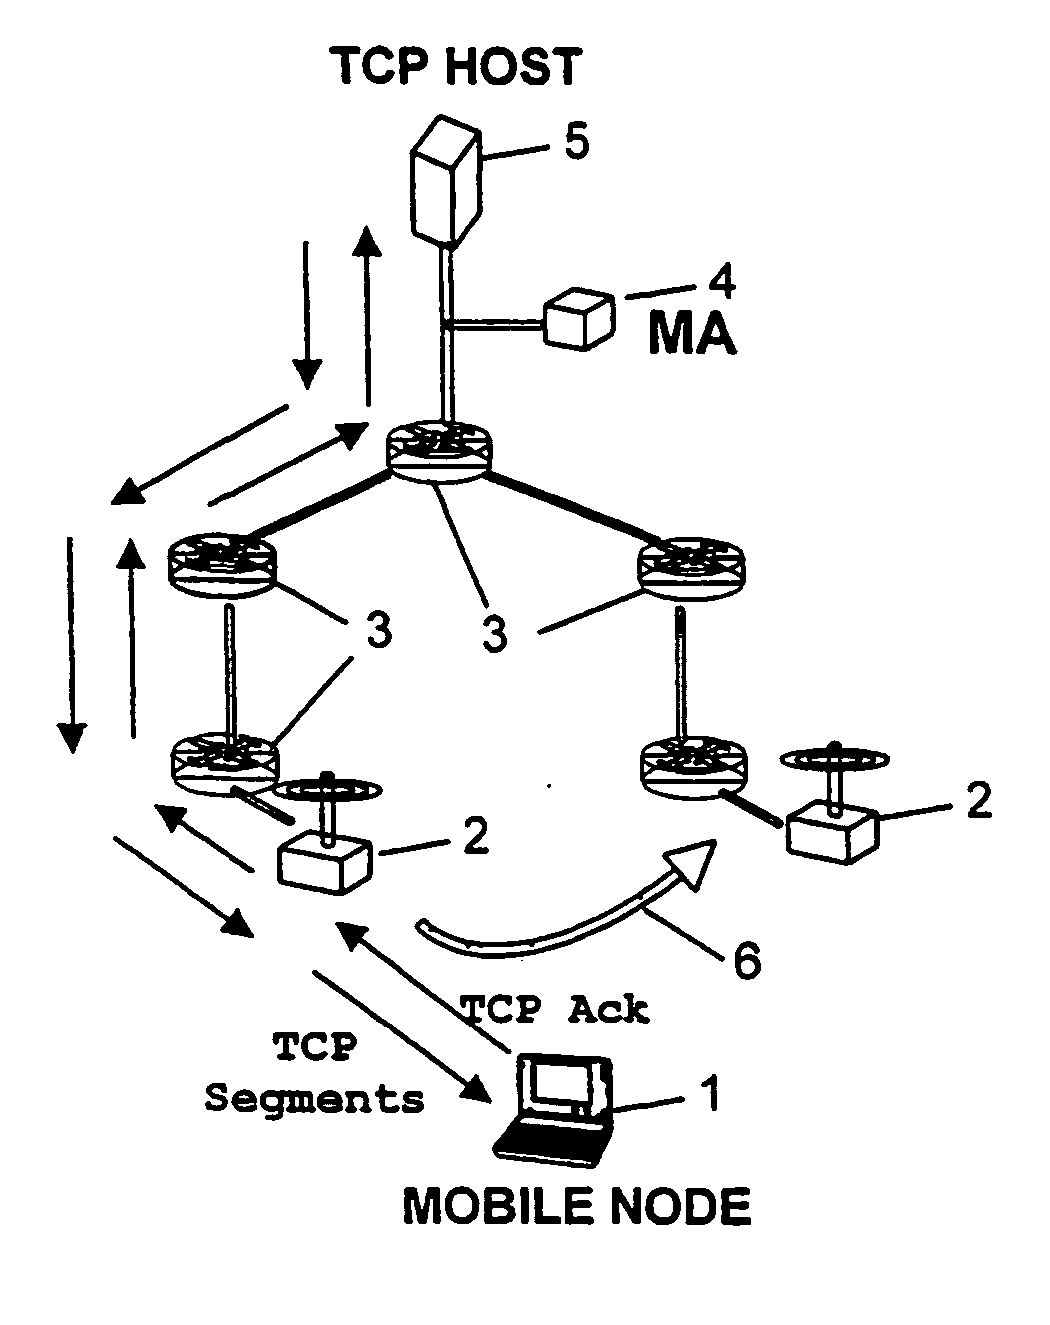 Method and system for reducting traffic flow to a mobile node during handoff situations